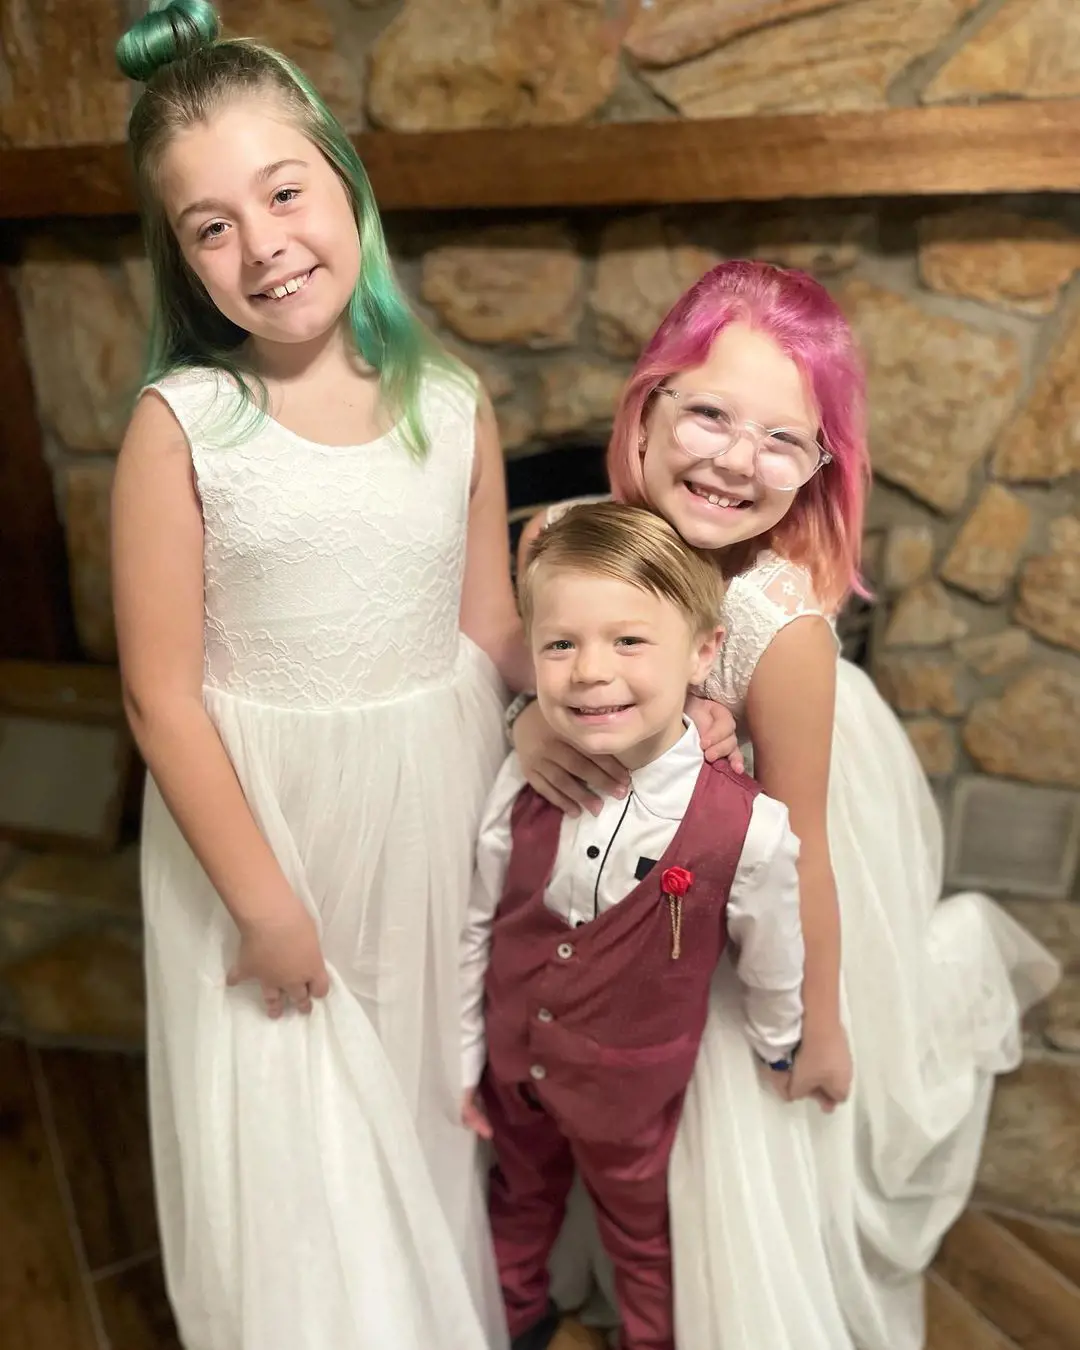 Smith has three stepchildren from his married life with Marie. From left- Timber, Mayer Mans, and Adelyn celebrating Easter